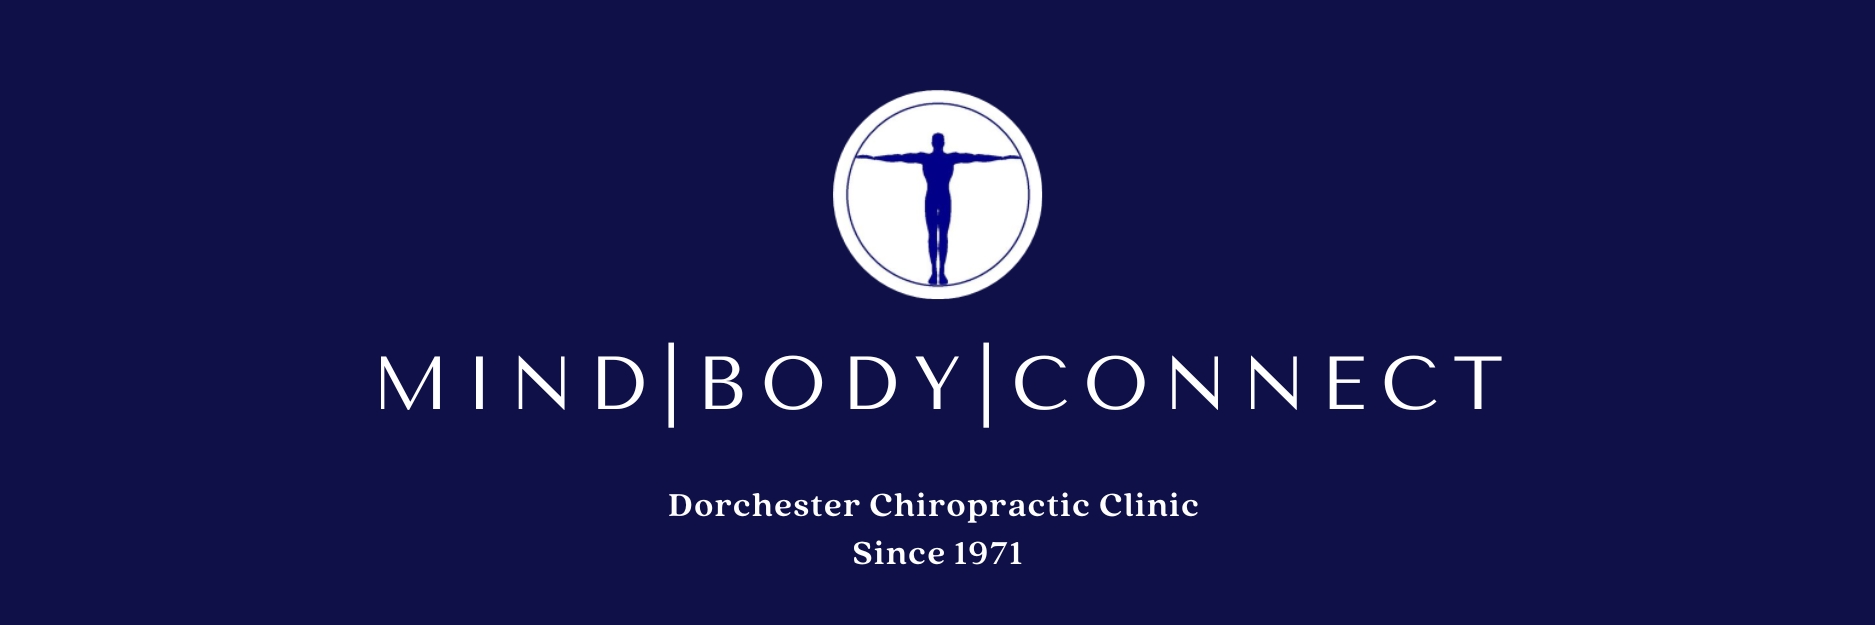 Chiropractic clinic | Dorchester Chiropractic Clinic